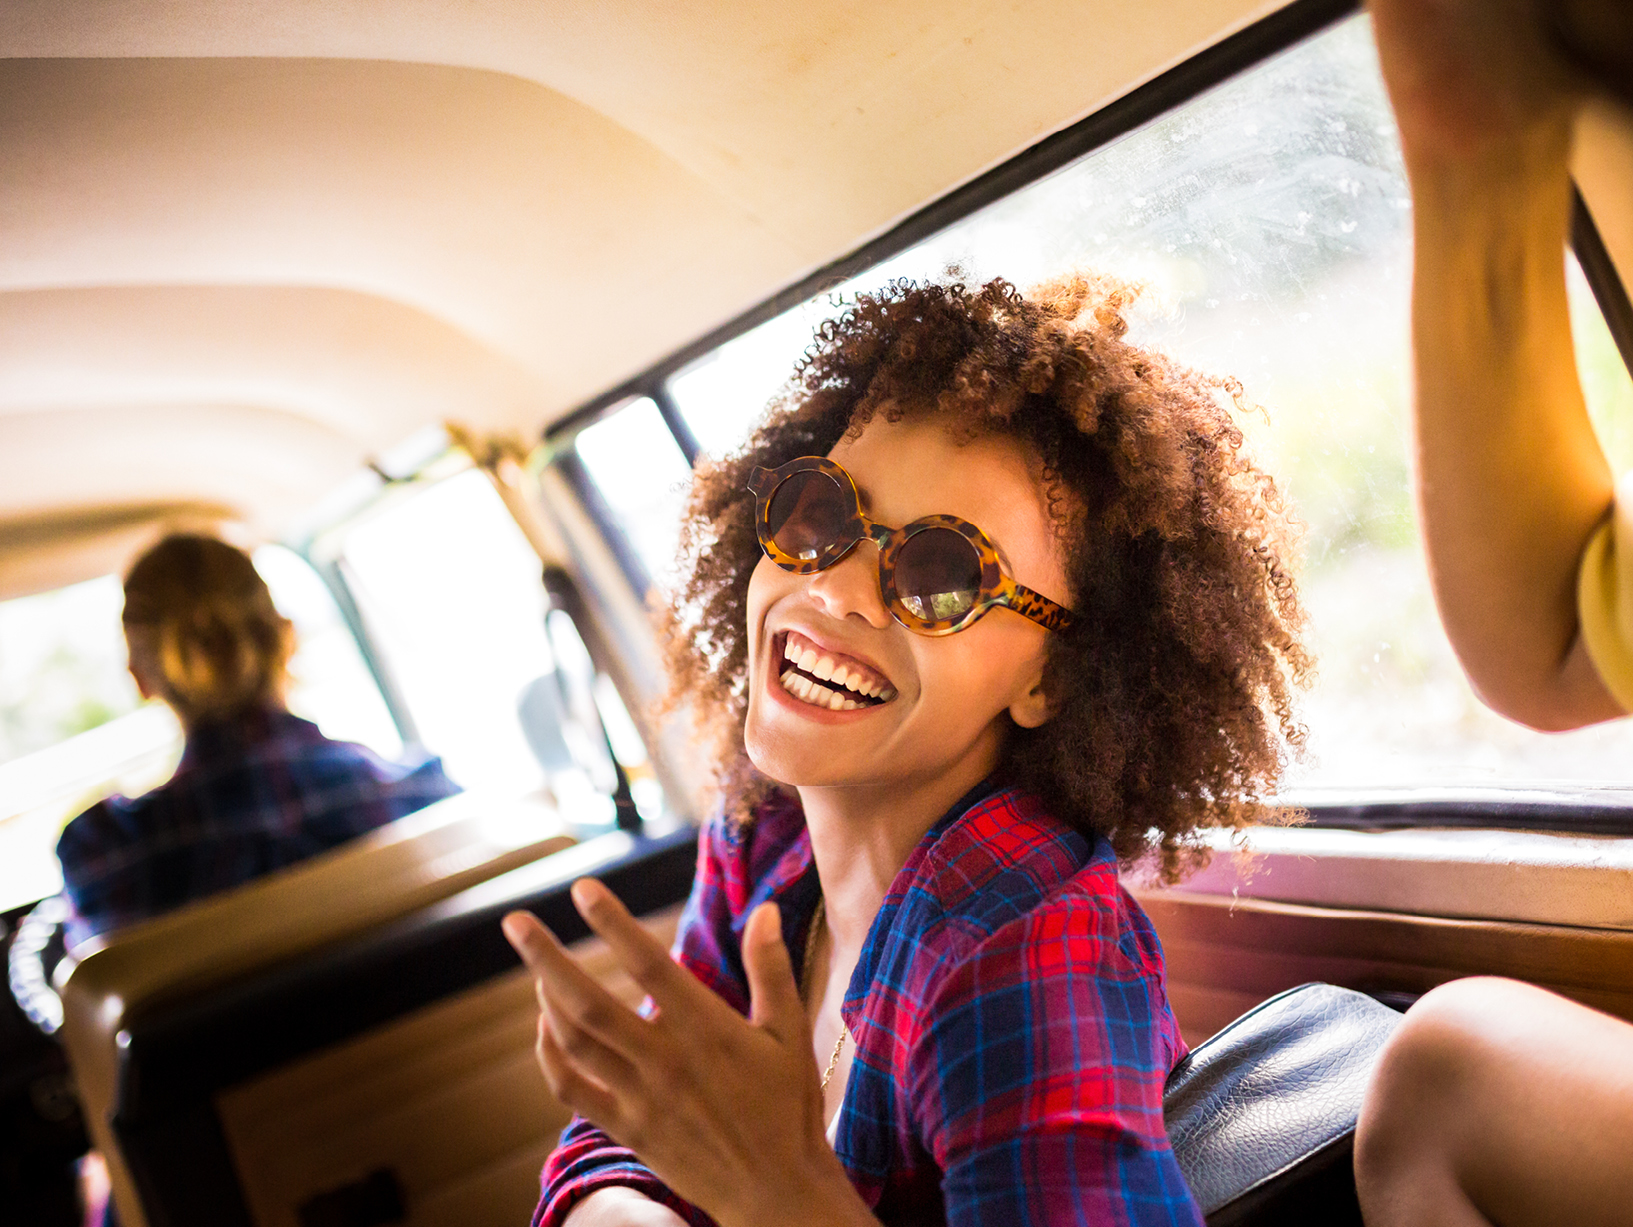 person smiling during RV roadtrip